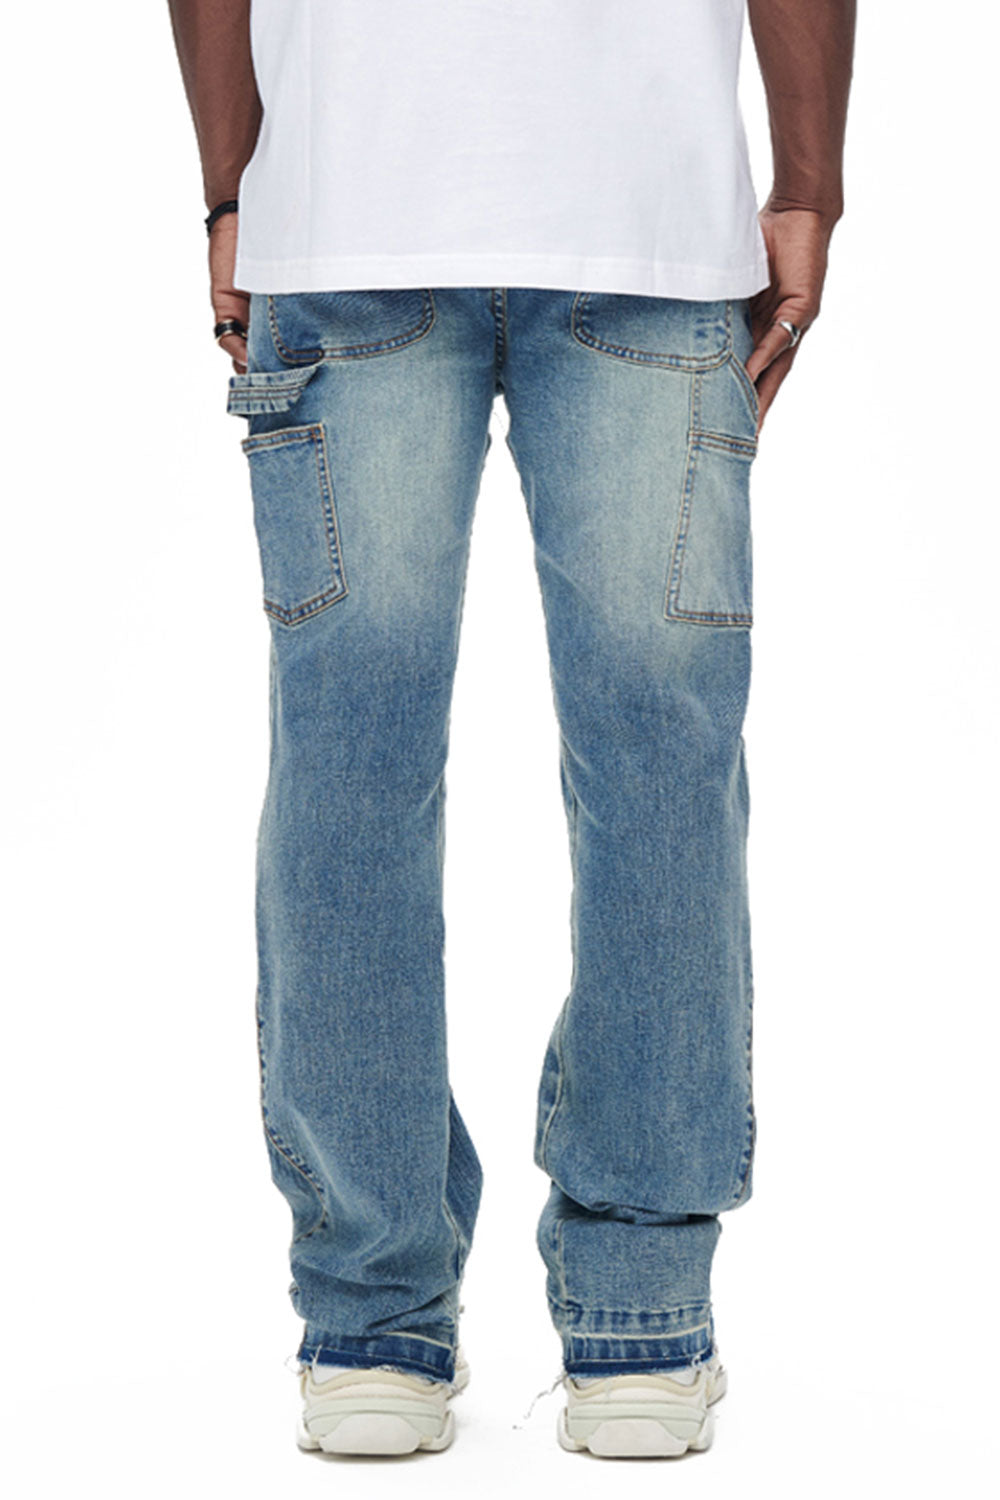 Gingtto's Mens Flared Casual Jeans: A Timeless Classic for Men